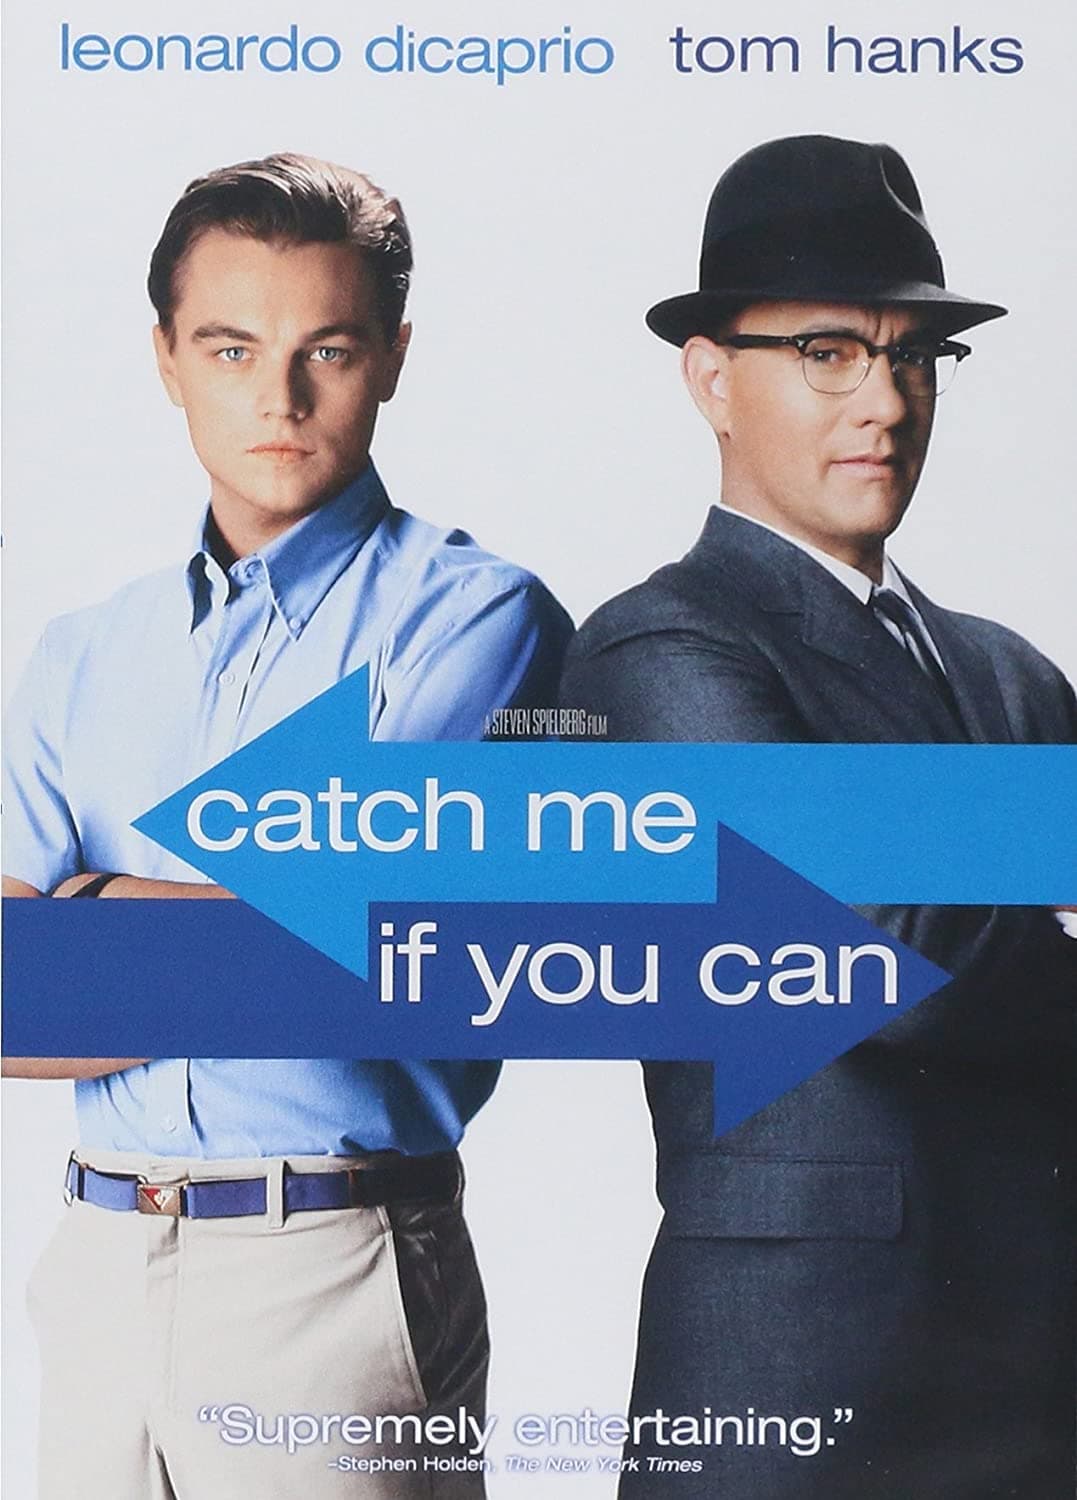 leonardo dicaprio tom hanks
ASTEVEN SPIELBERG FILM
catch me
if you can
"Supremely entertaining."
-Stephen Holden. The New York Times